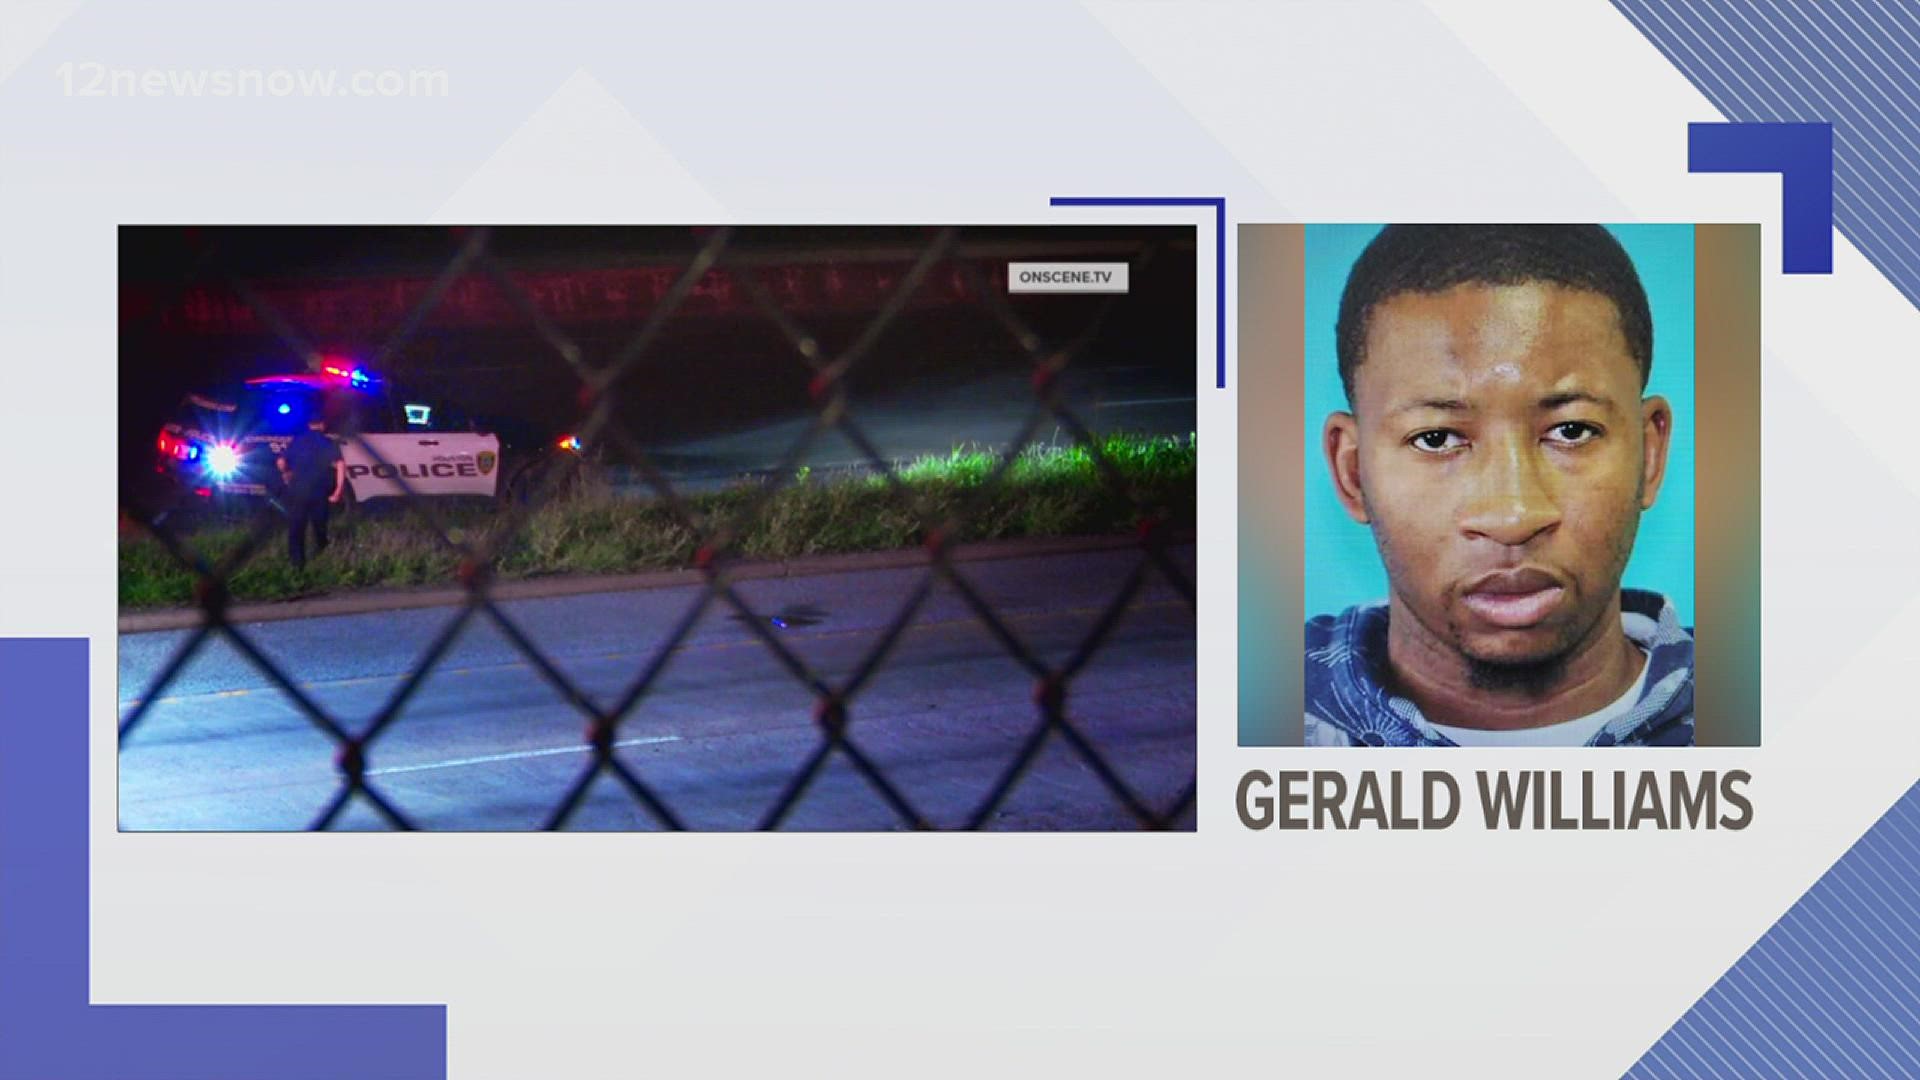 Gerald Williams is accused of shooting a 17-year-old in the head after an Astro's game.